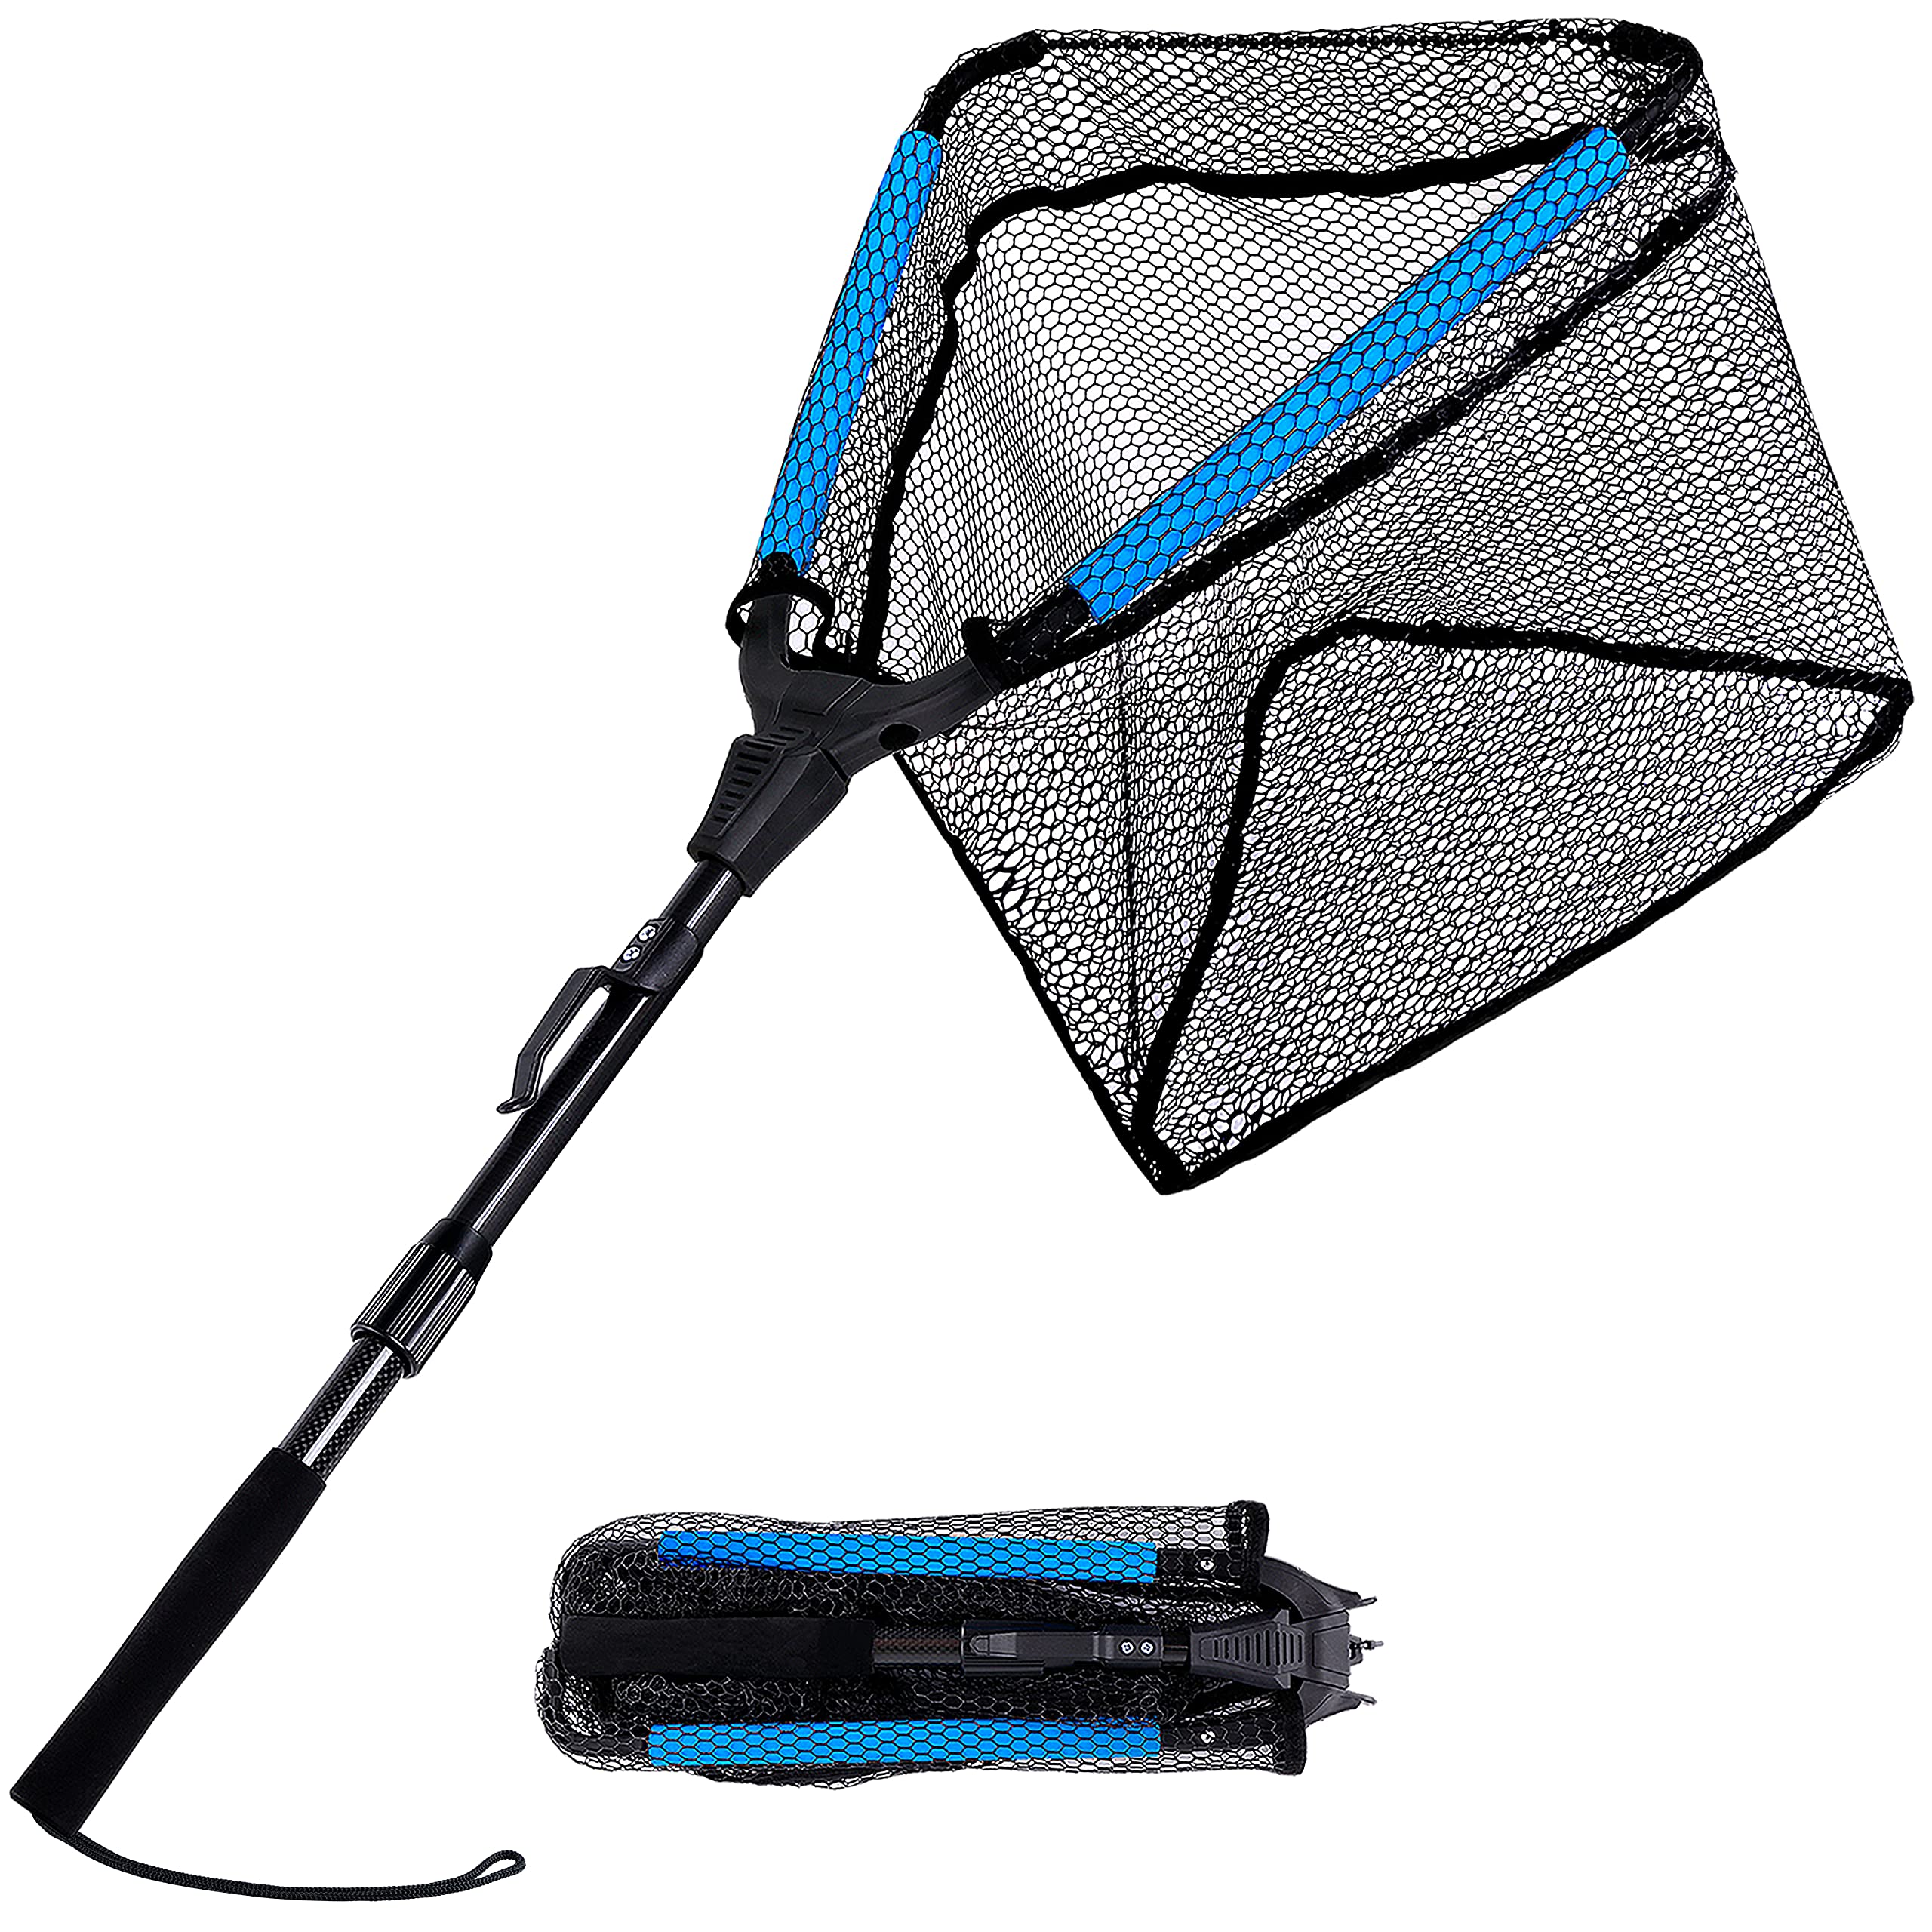 PLUSINNO Fishing Net Fish Landing Net, Foldable Collapsible Telescopic Pole  Handle, Durable Nylon Material Mesh, Safe Fish Catching or Releasing  Floating Net,Telescopic Handle/35Full